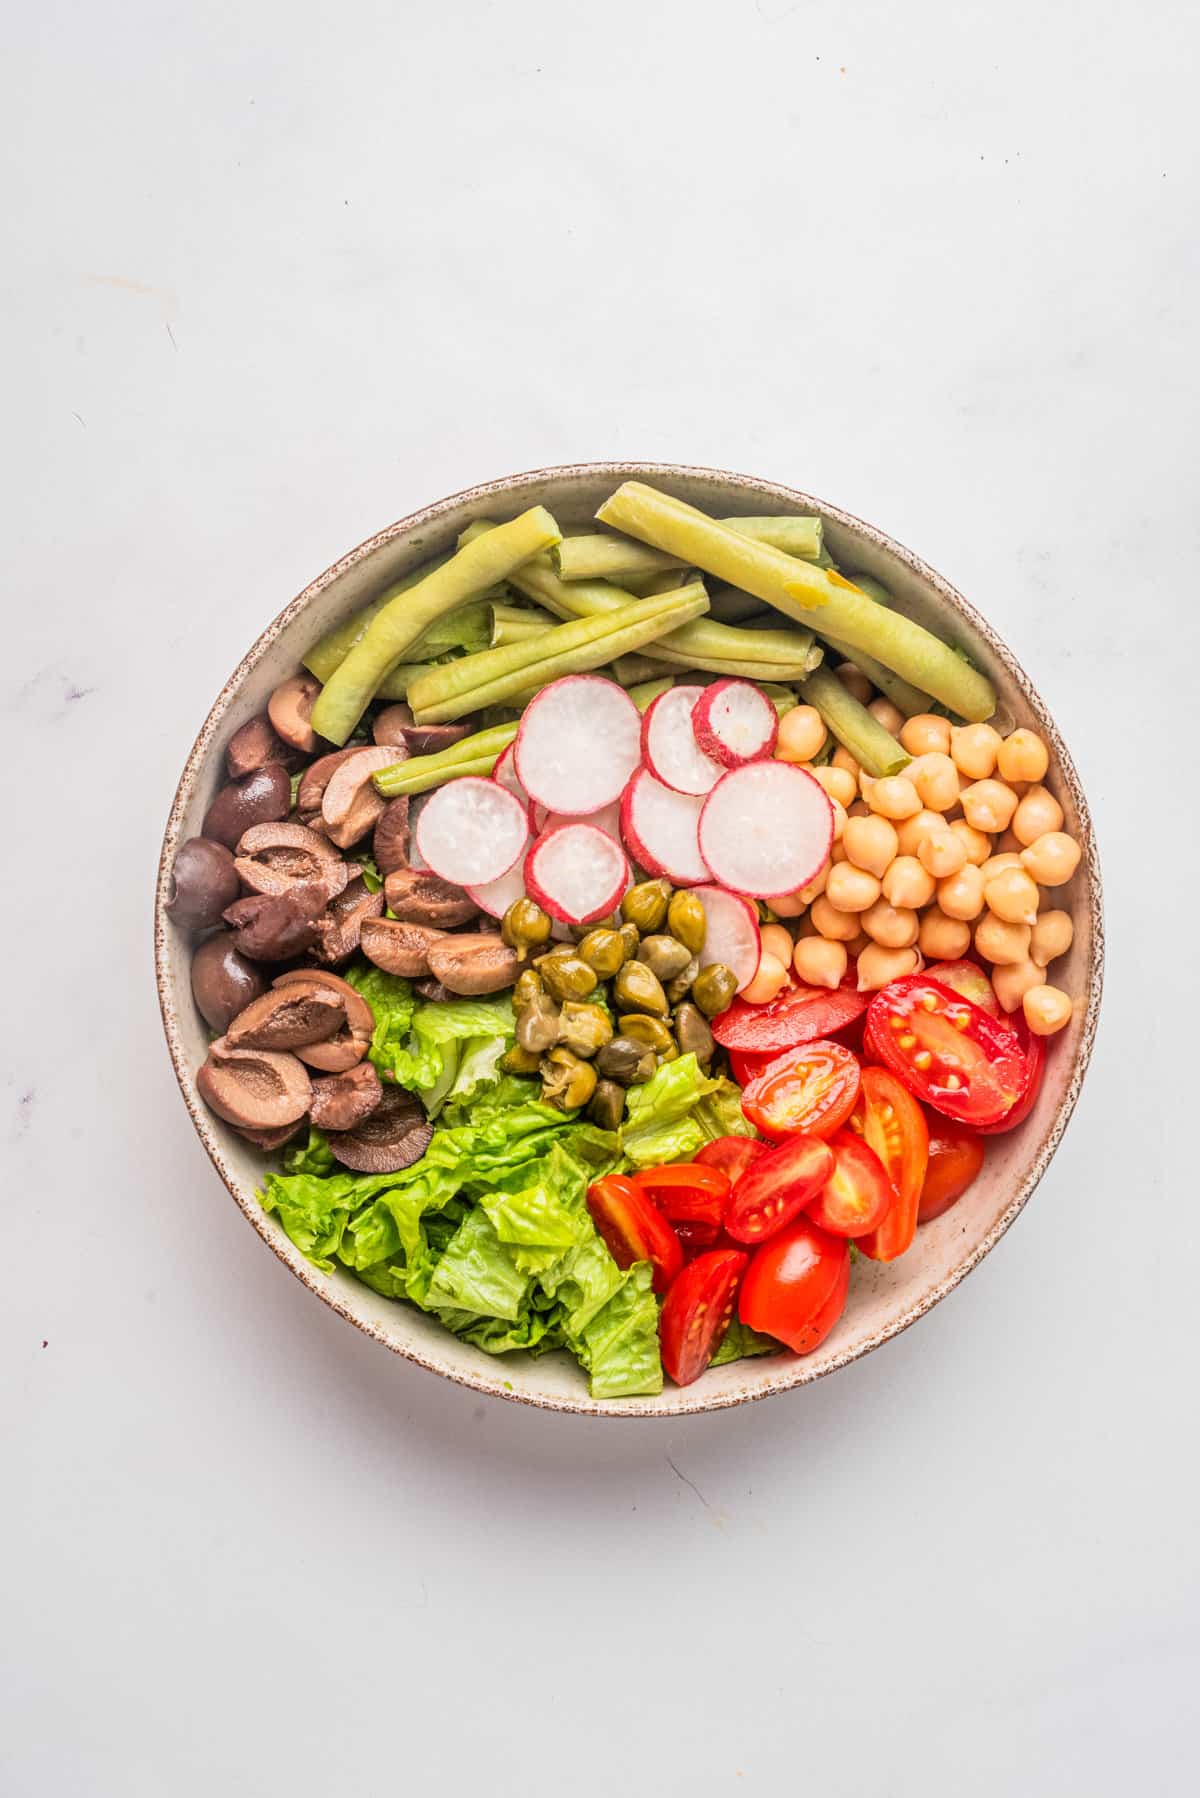 An image of vegan nicoise salad arranged beautifully in a bowl.